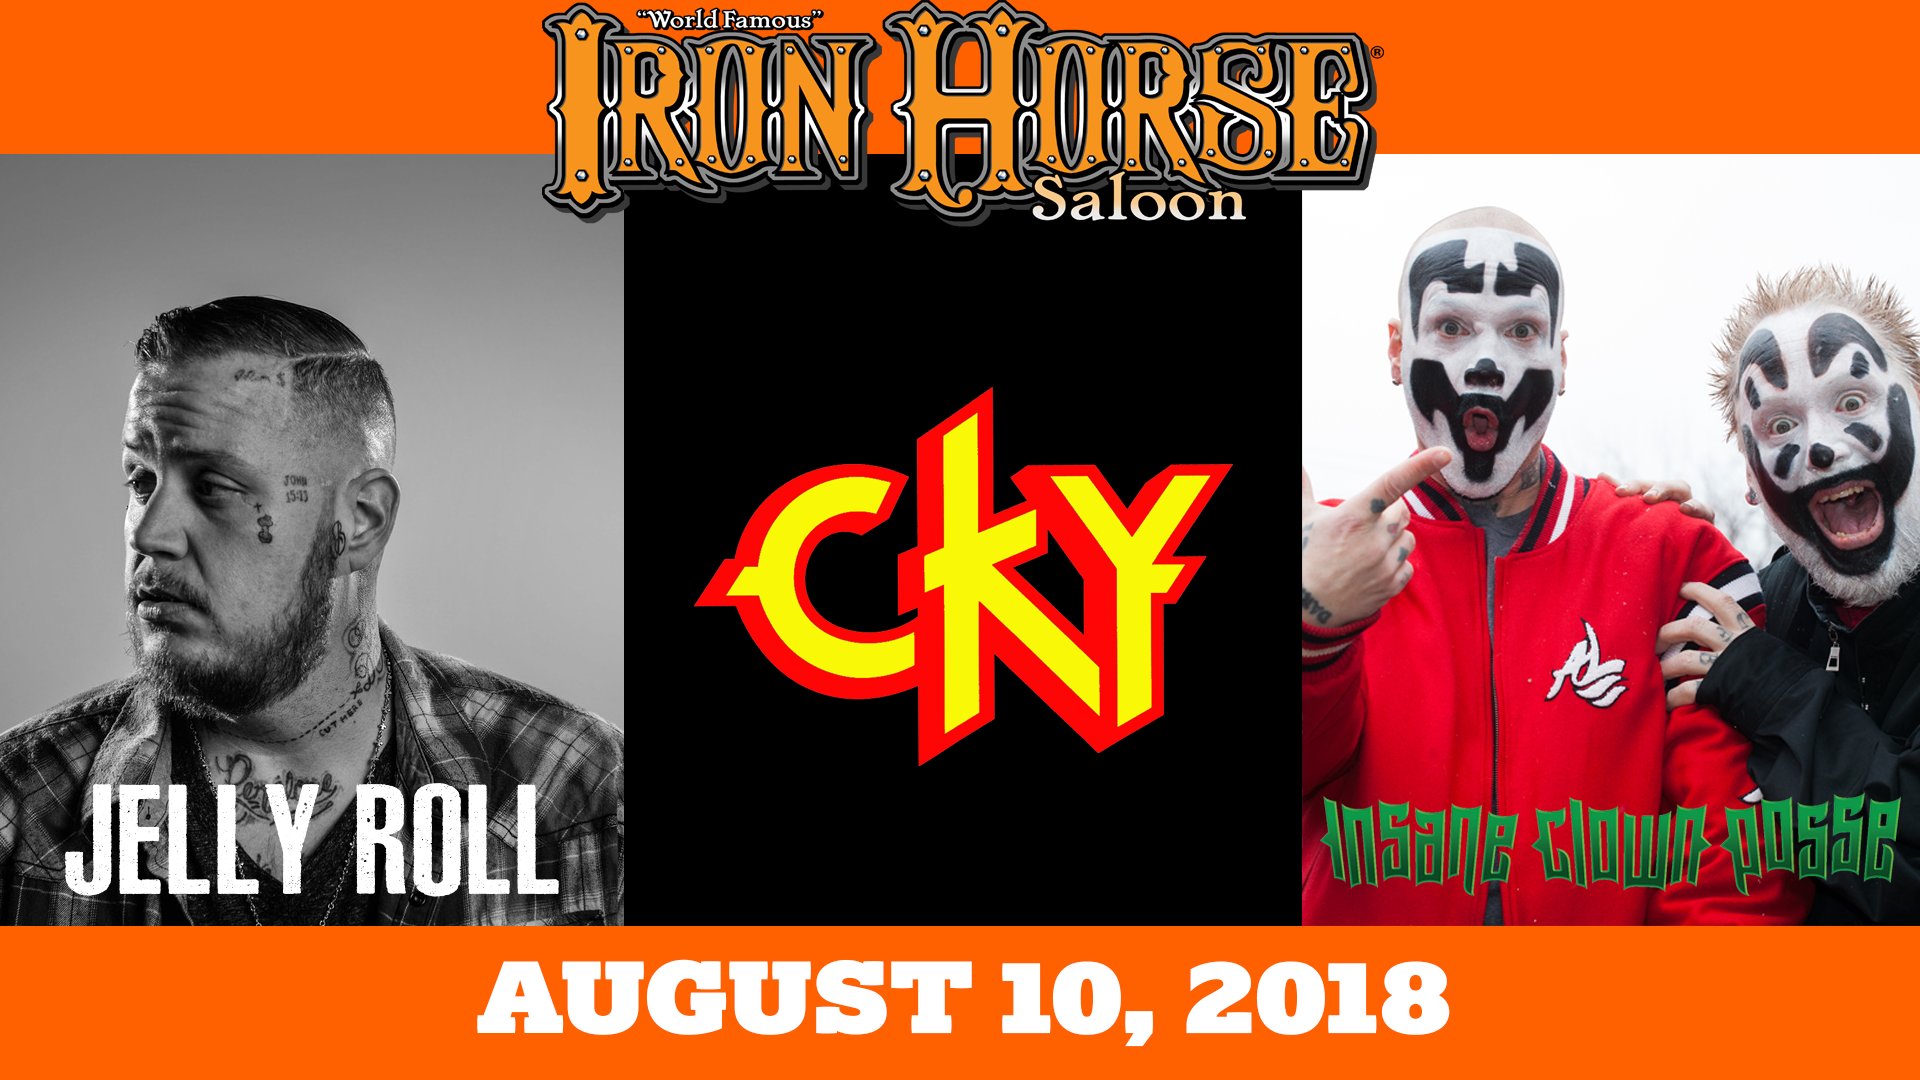 ICP, Jelly Roll, CKY All Playing Main Stage on August 10th at Sturgis